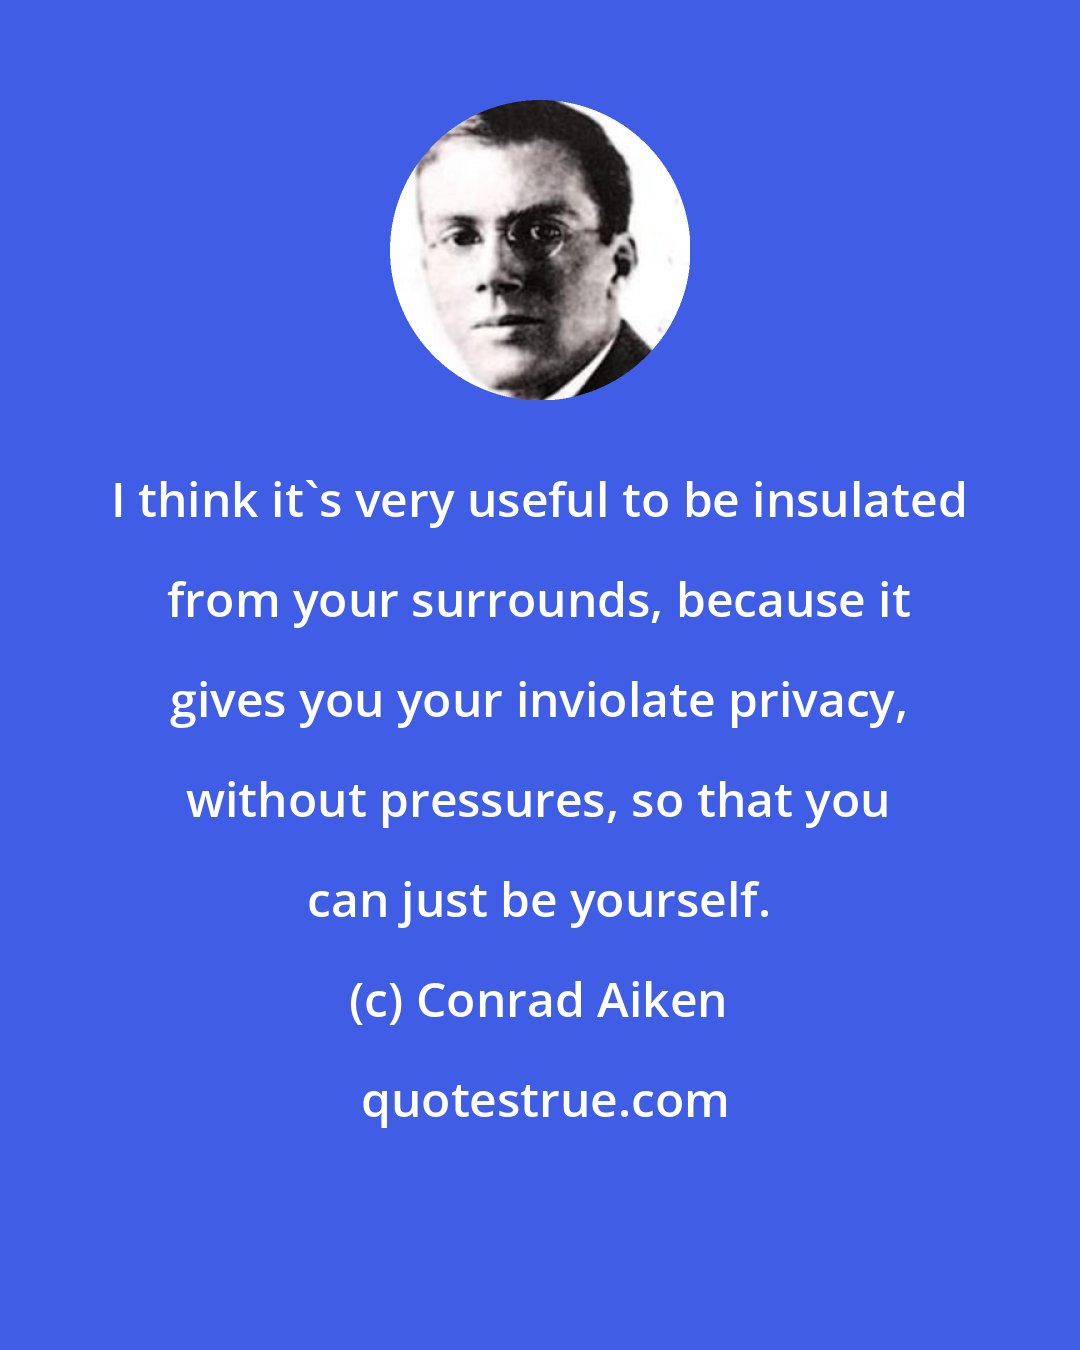 Conrad Aiken: I think it's very useful to be insulated from your surrounds, because it gives you your inviolate privacy, without pressures, so that you can just be yourself.